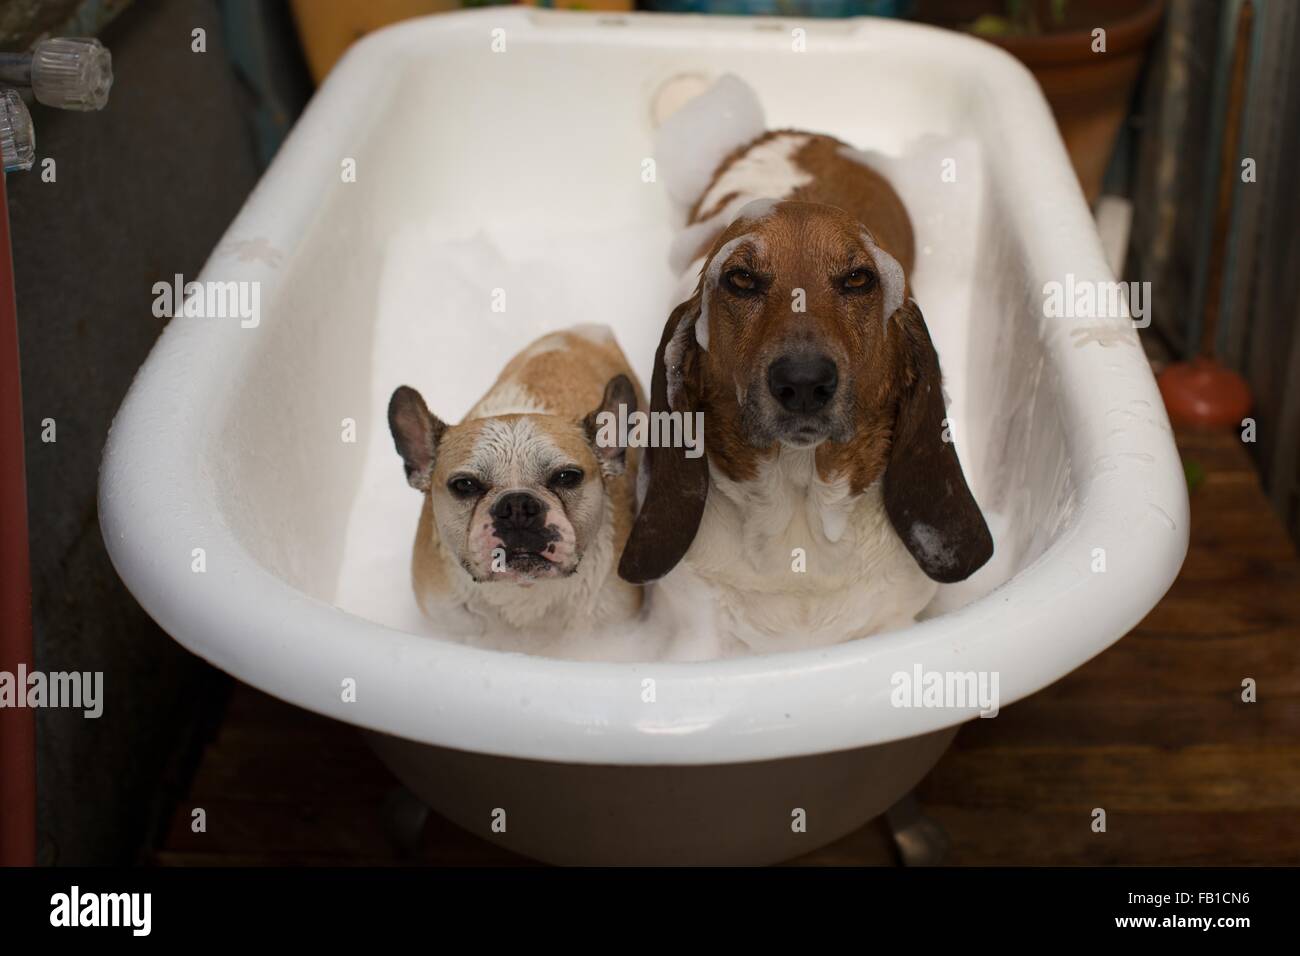 Basset Hound And French Bulldog In Bathtub Covered In Soap Suds